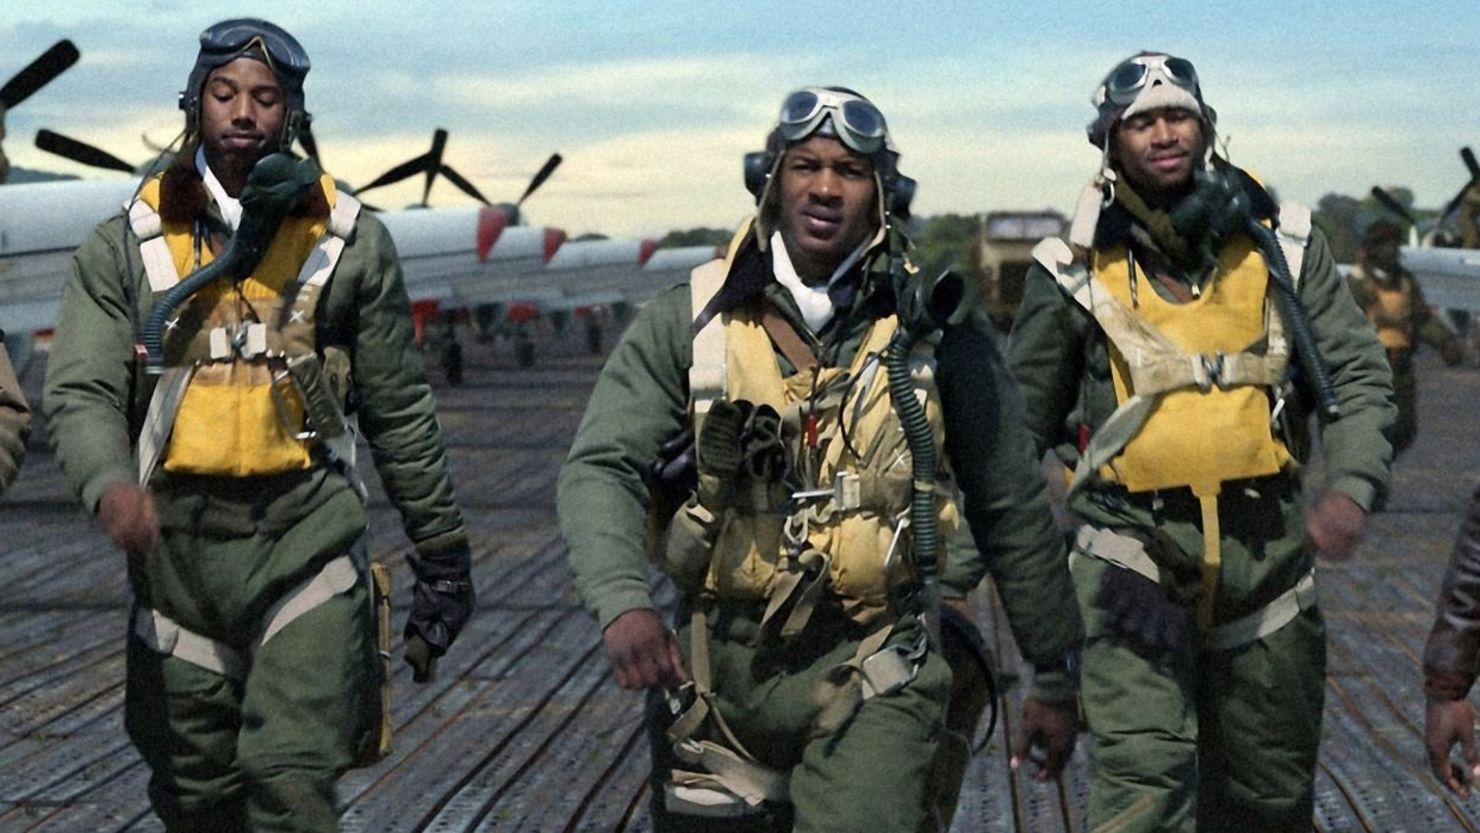 "Red Tails" is about the very first African-American military pilots, who served in segregated units during World War II. 